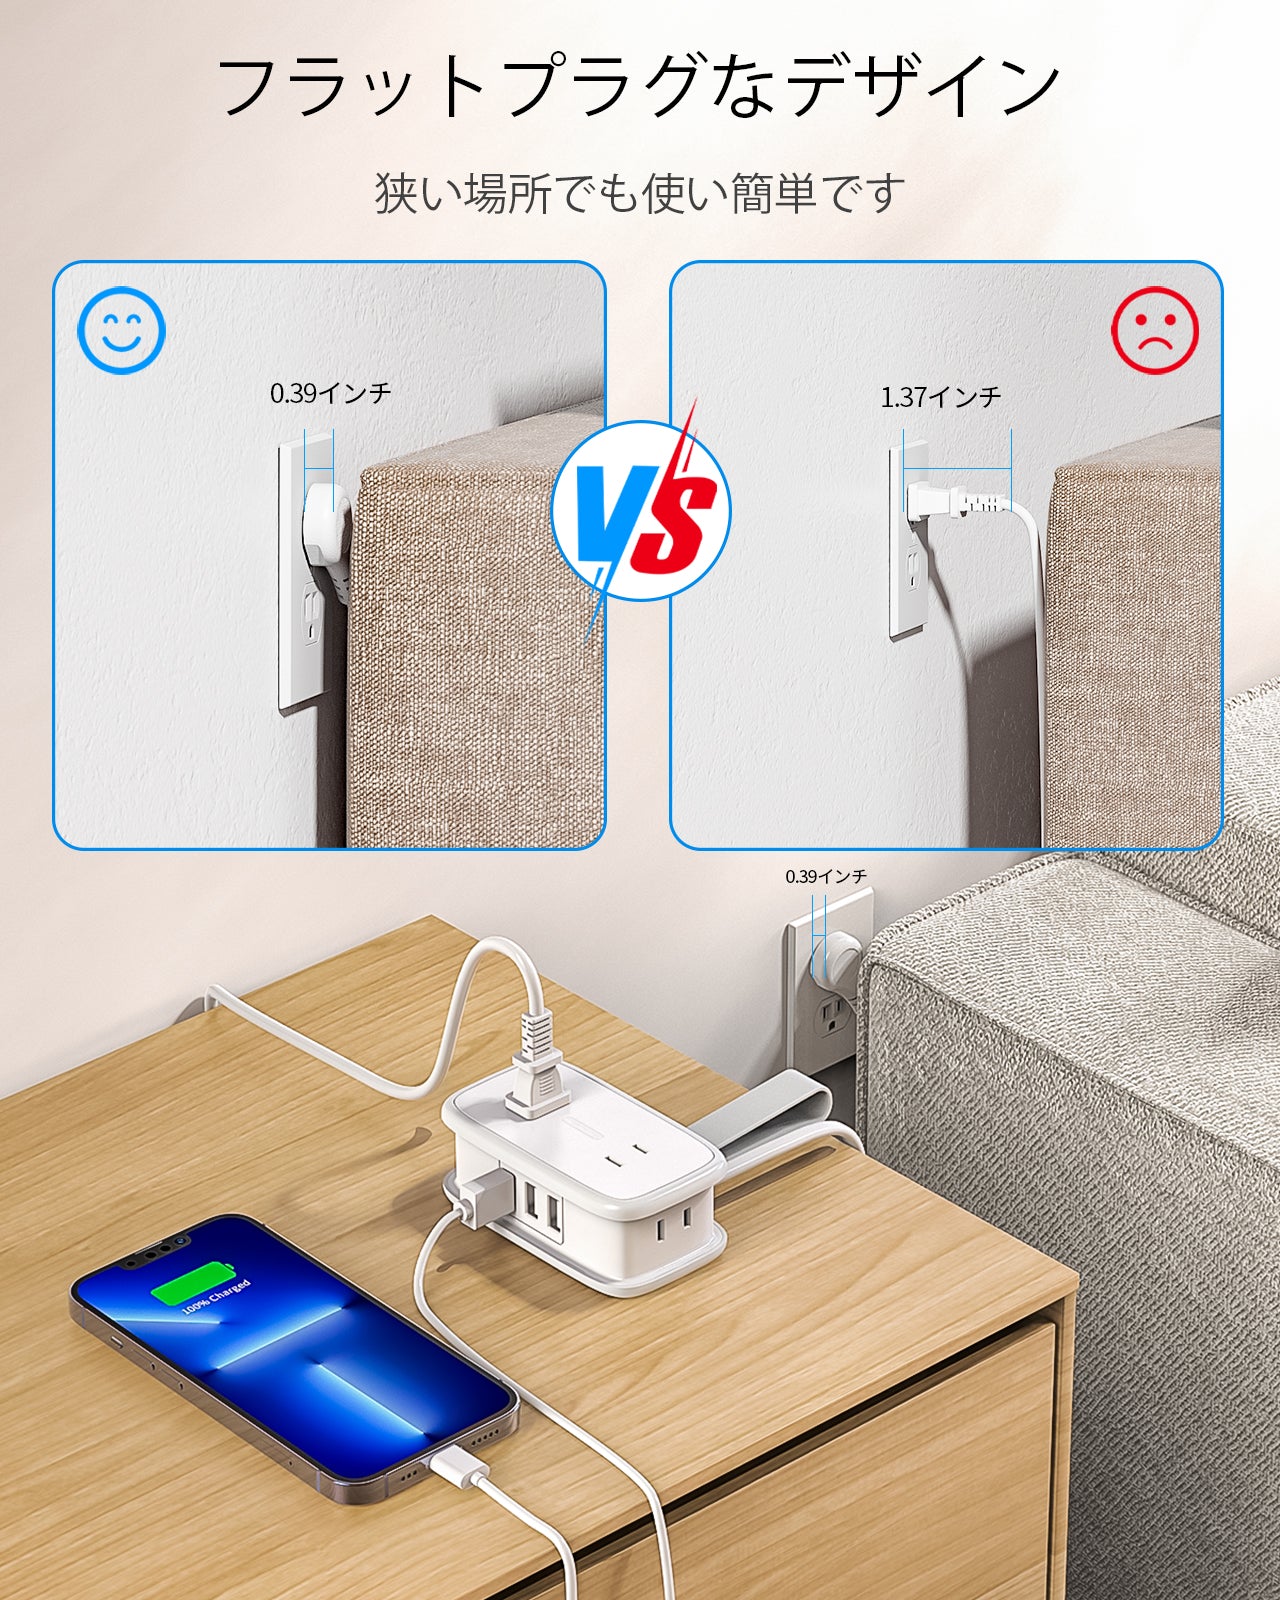 Ntonpower New JP Pocket Power Strip 4 Outlets 3 USB Small&Travel